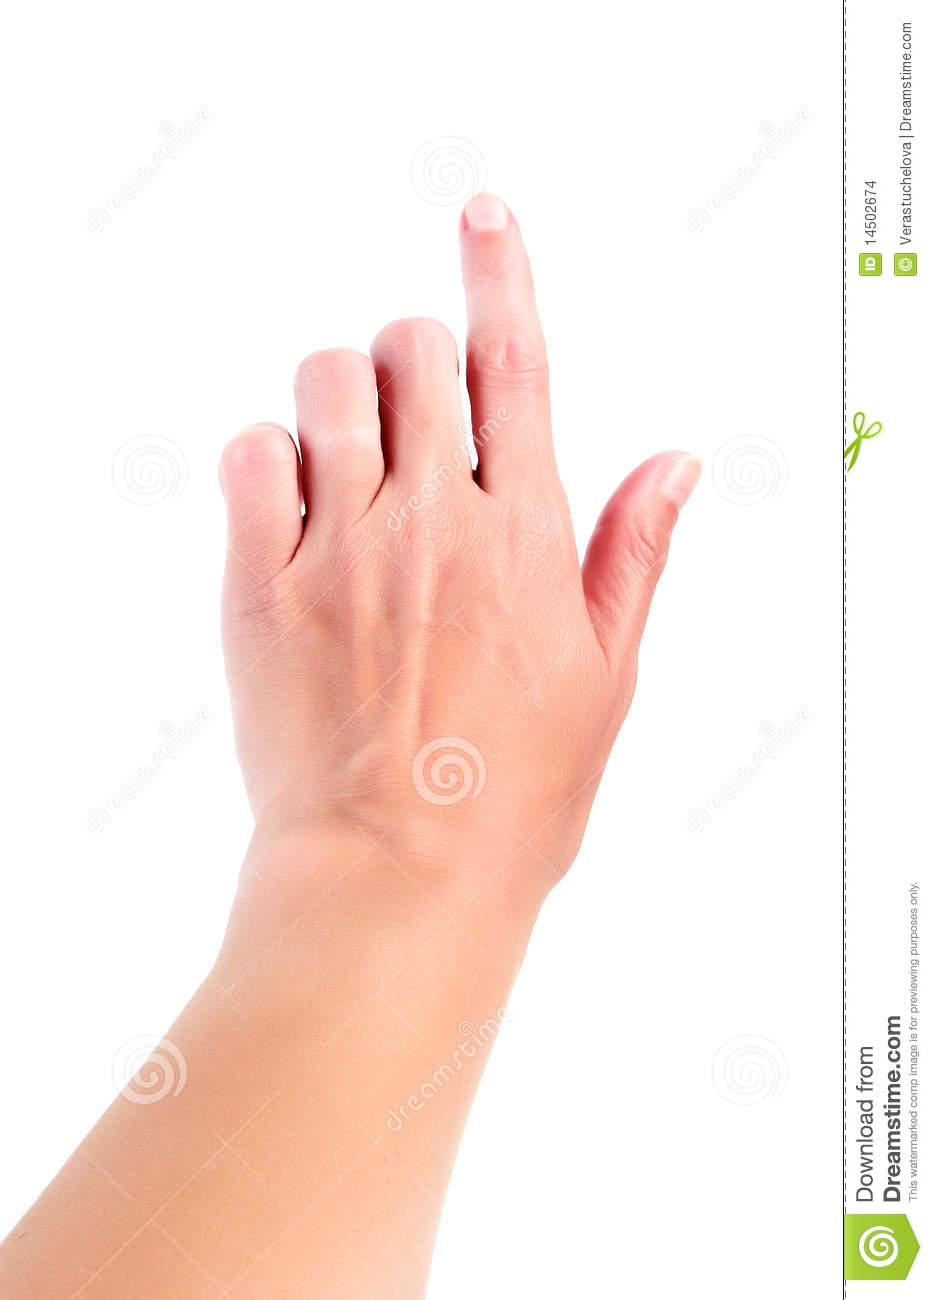 Woman S Pointing Hand Stock Images   Image  14502674